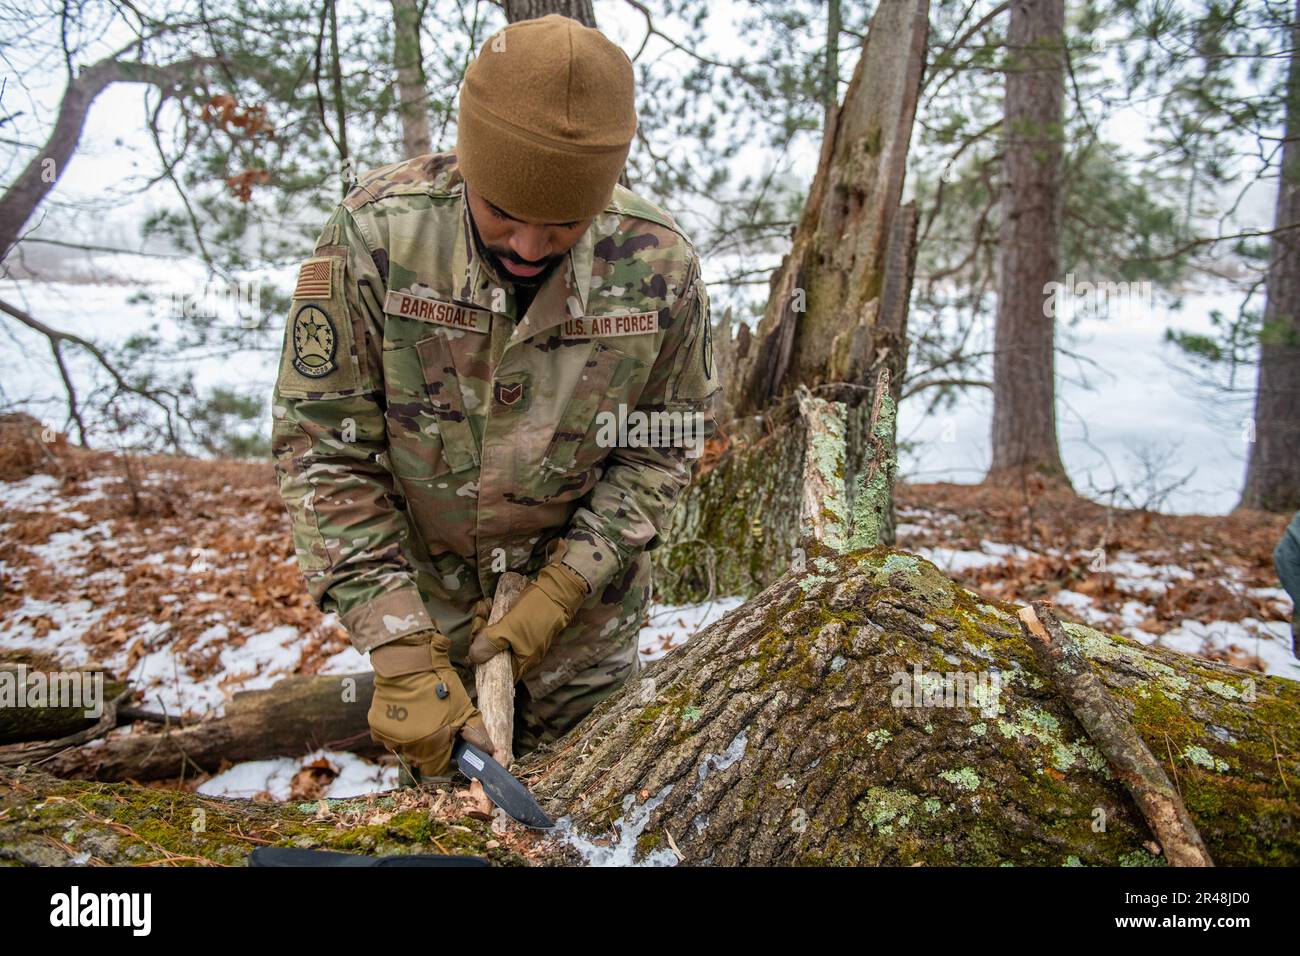 U.S. Air Force Staff Sgt. David Barksdale, of the 290th Joint Communications Support Squadron, sharpens a stick into a stake Feb. 9, 2023, at Alpena Combat Readiness Training Center, Michigan. Airmen from the 290th JCSS are attending a class led by Survival, Evasion, Resistance and Escape (SERE) specialists to teach them basic survival techniques in a cold weather environment. Stock Photo